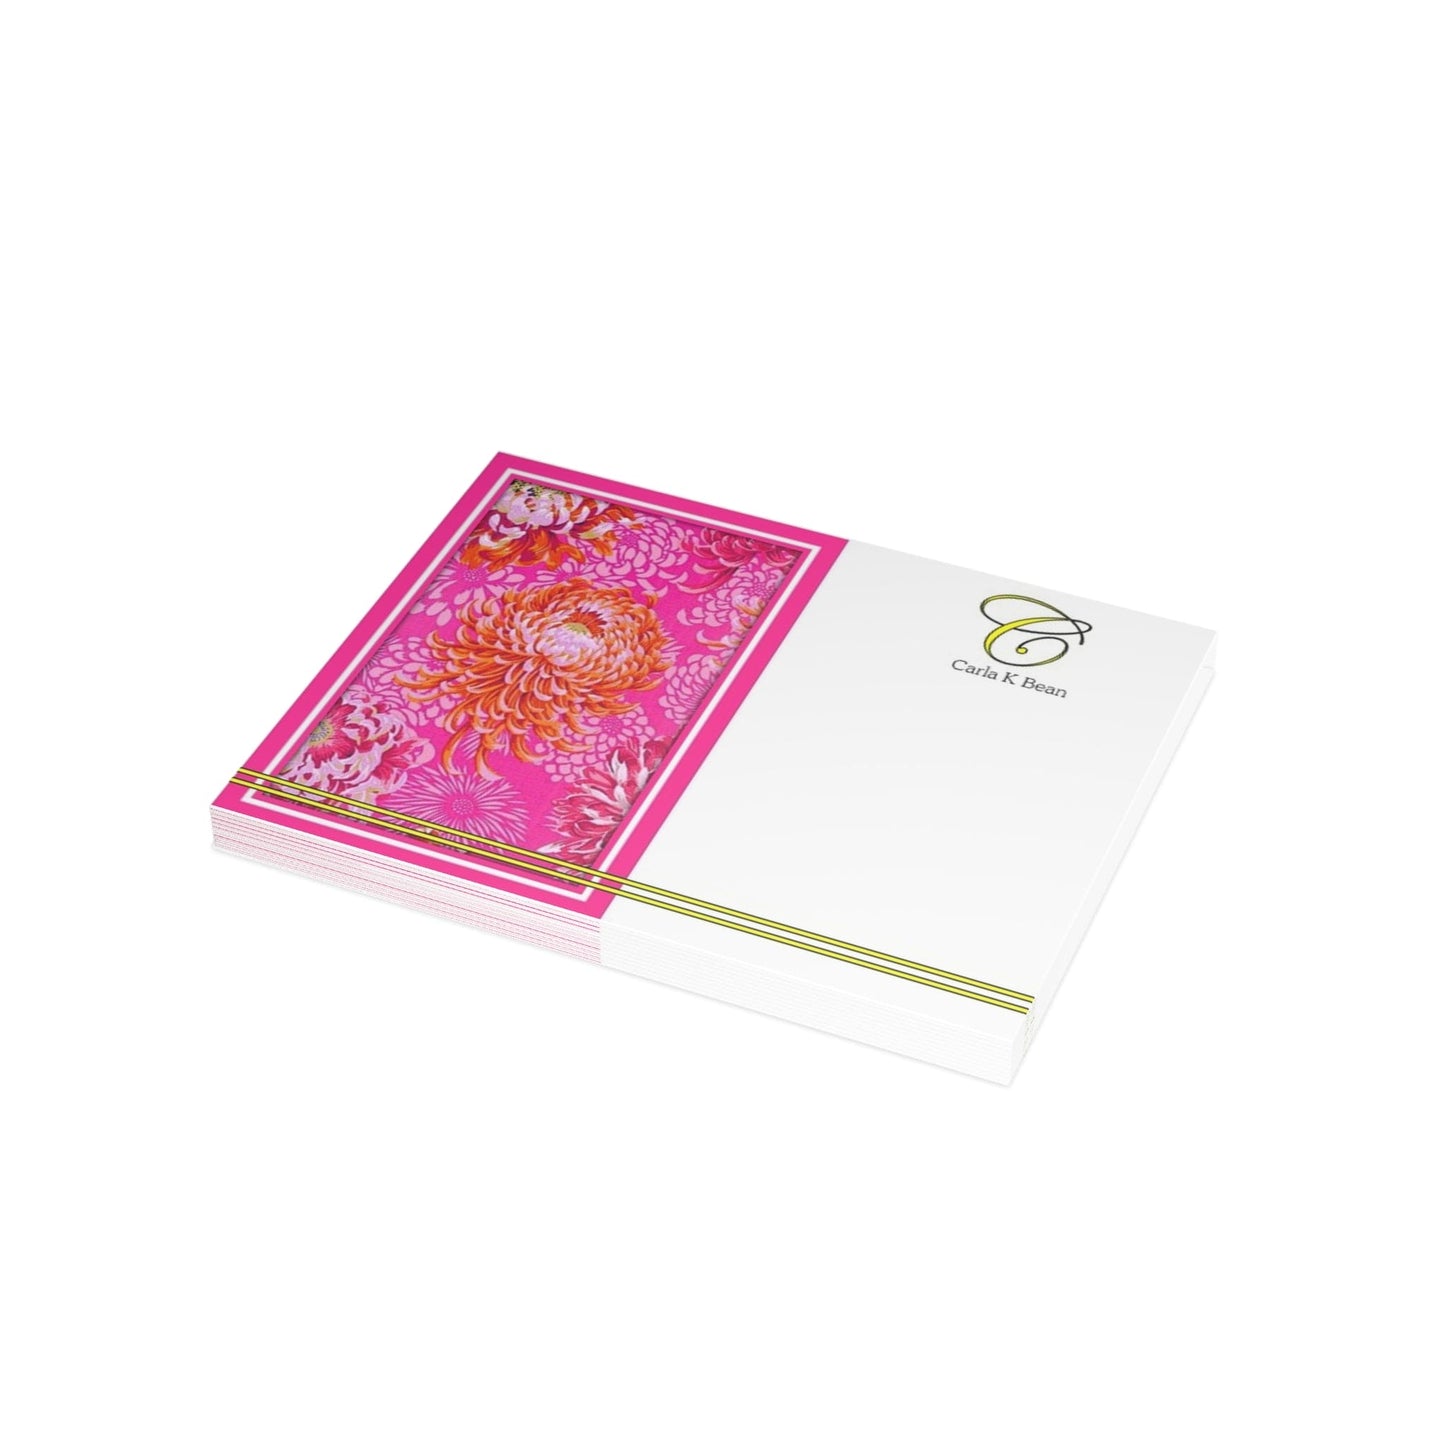 Personalized Note Card: Add a Personal Touch with Customized Stationery for Every Occasion. Pink Blooming Flowers Notecard